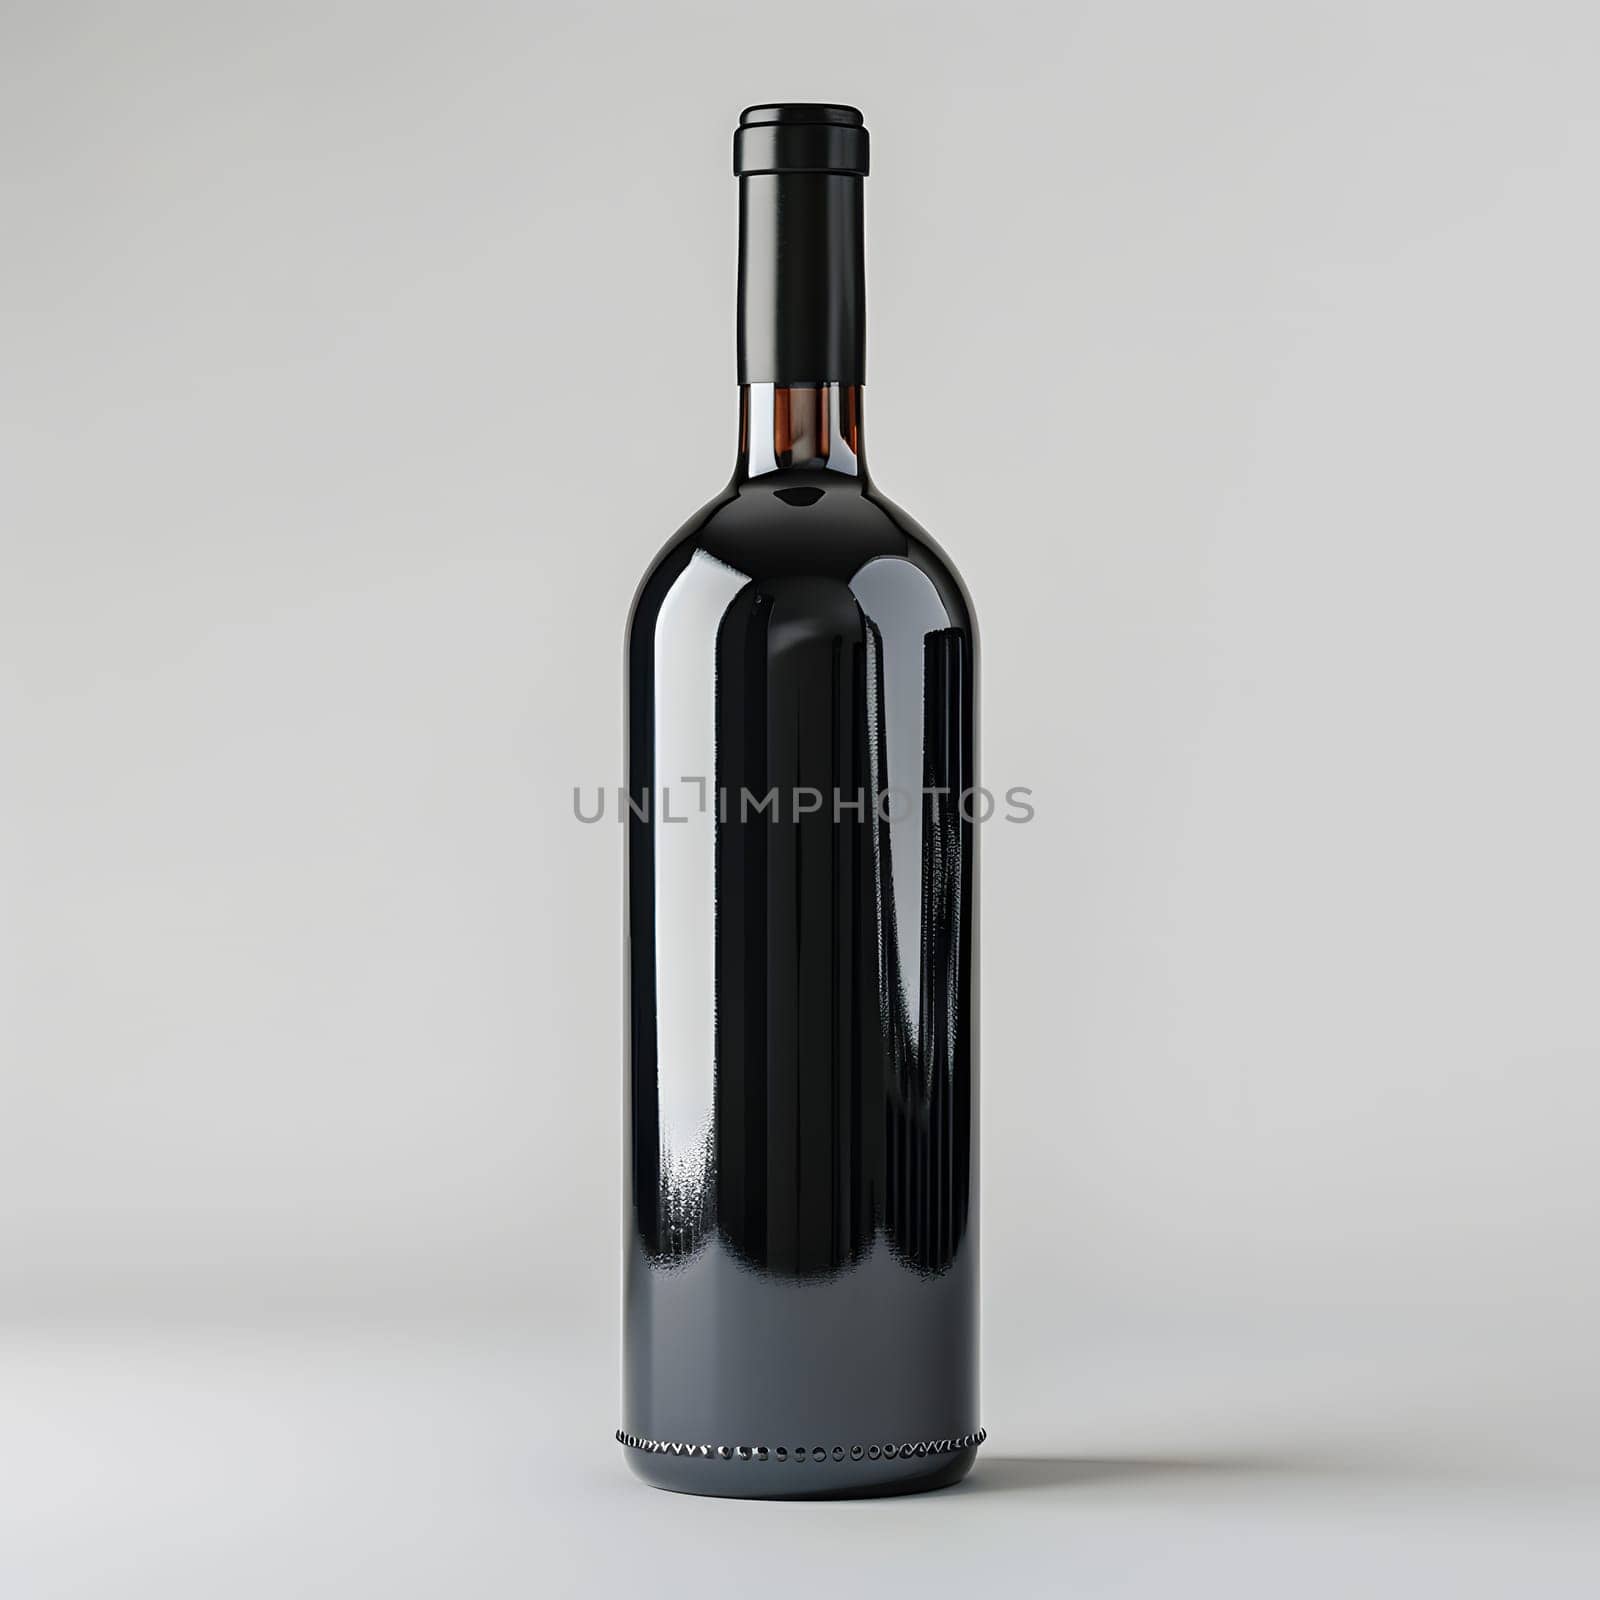 Glass bottle of wine resting on a white table surface by Nadtochiy